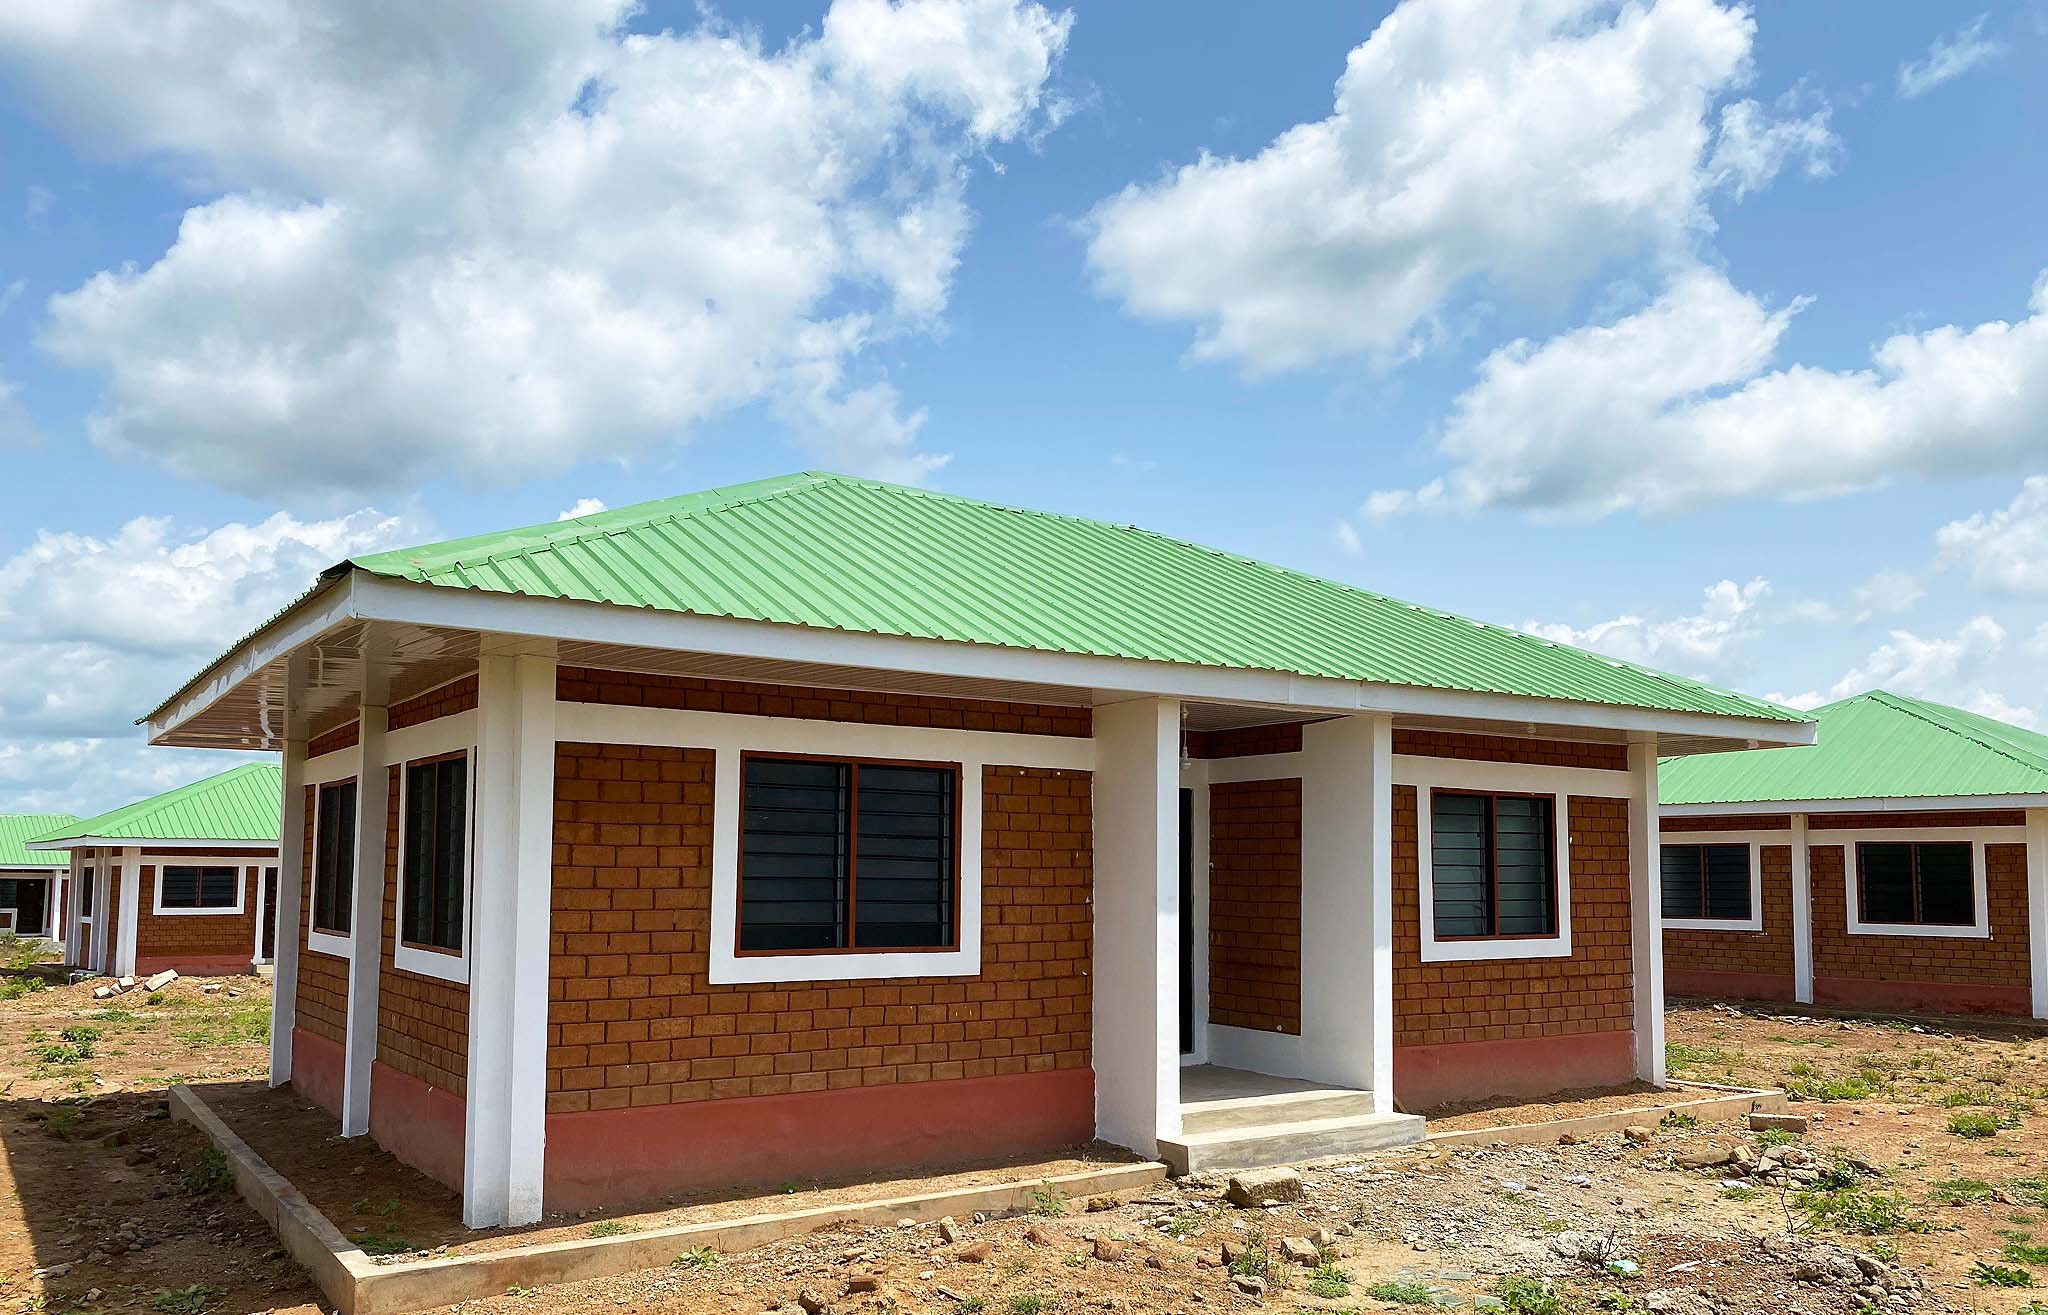 Cutting EDGE: The first climate certified affordable housing in Northern Ghana